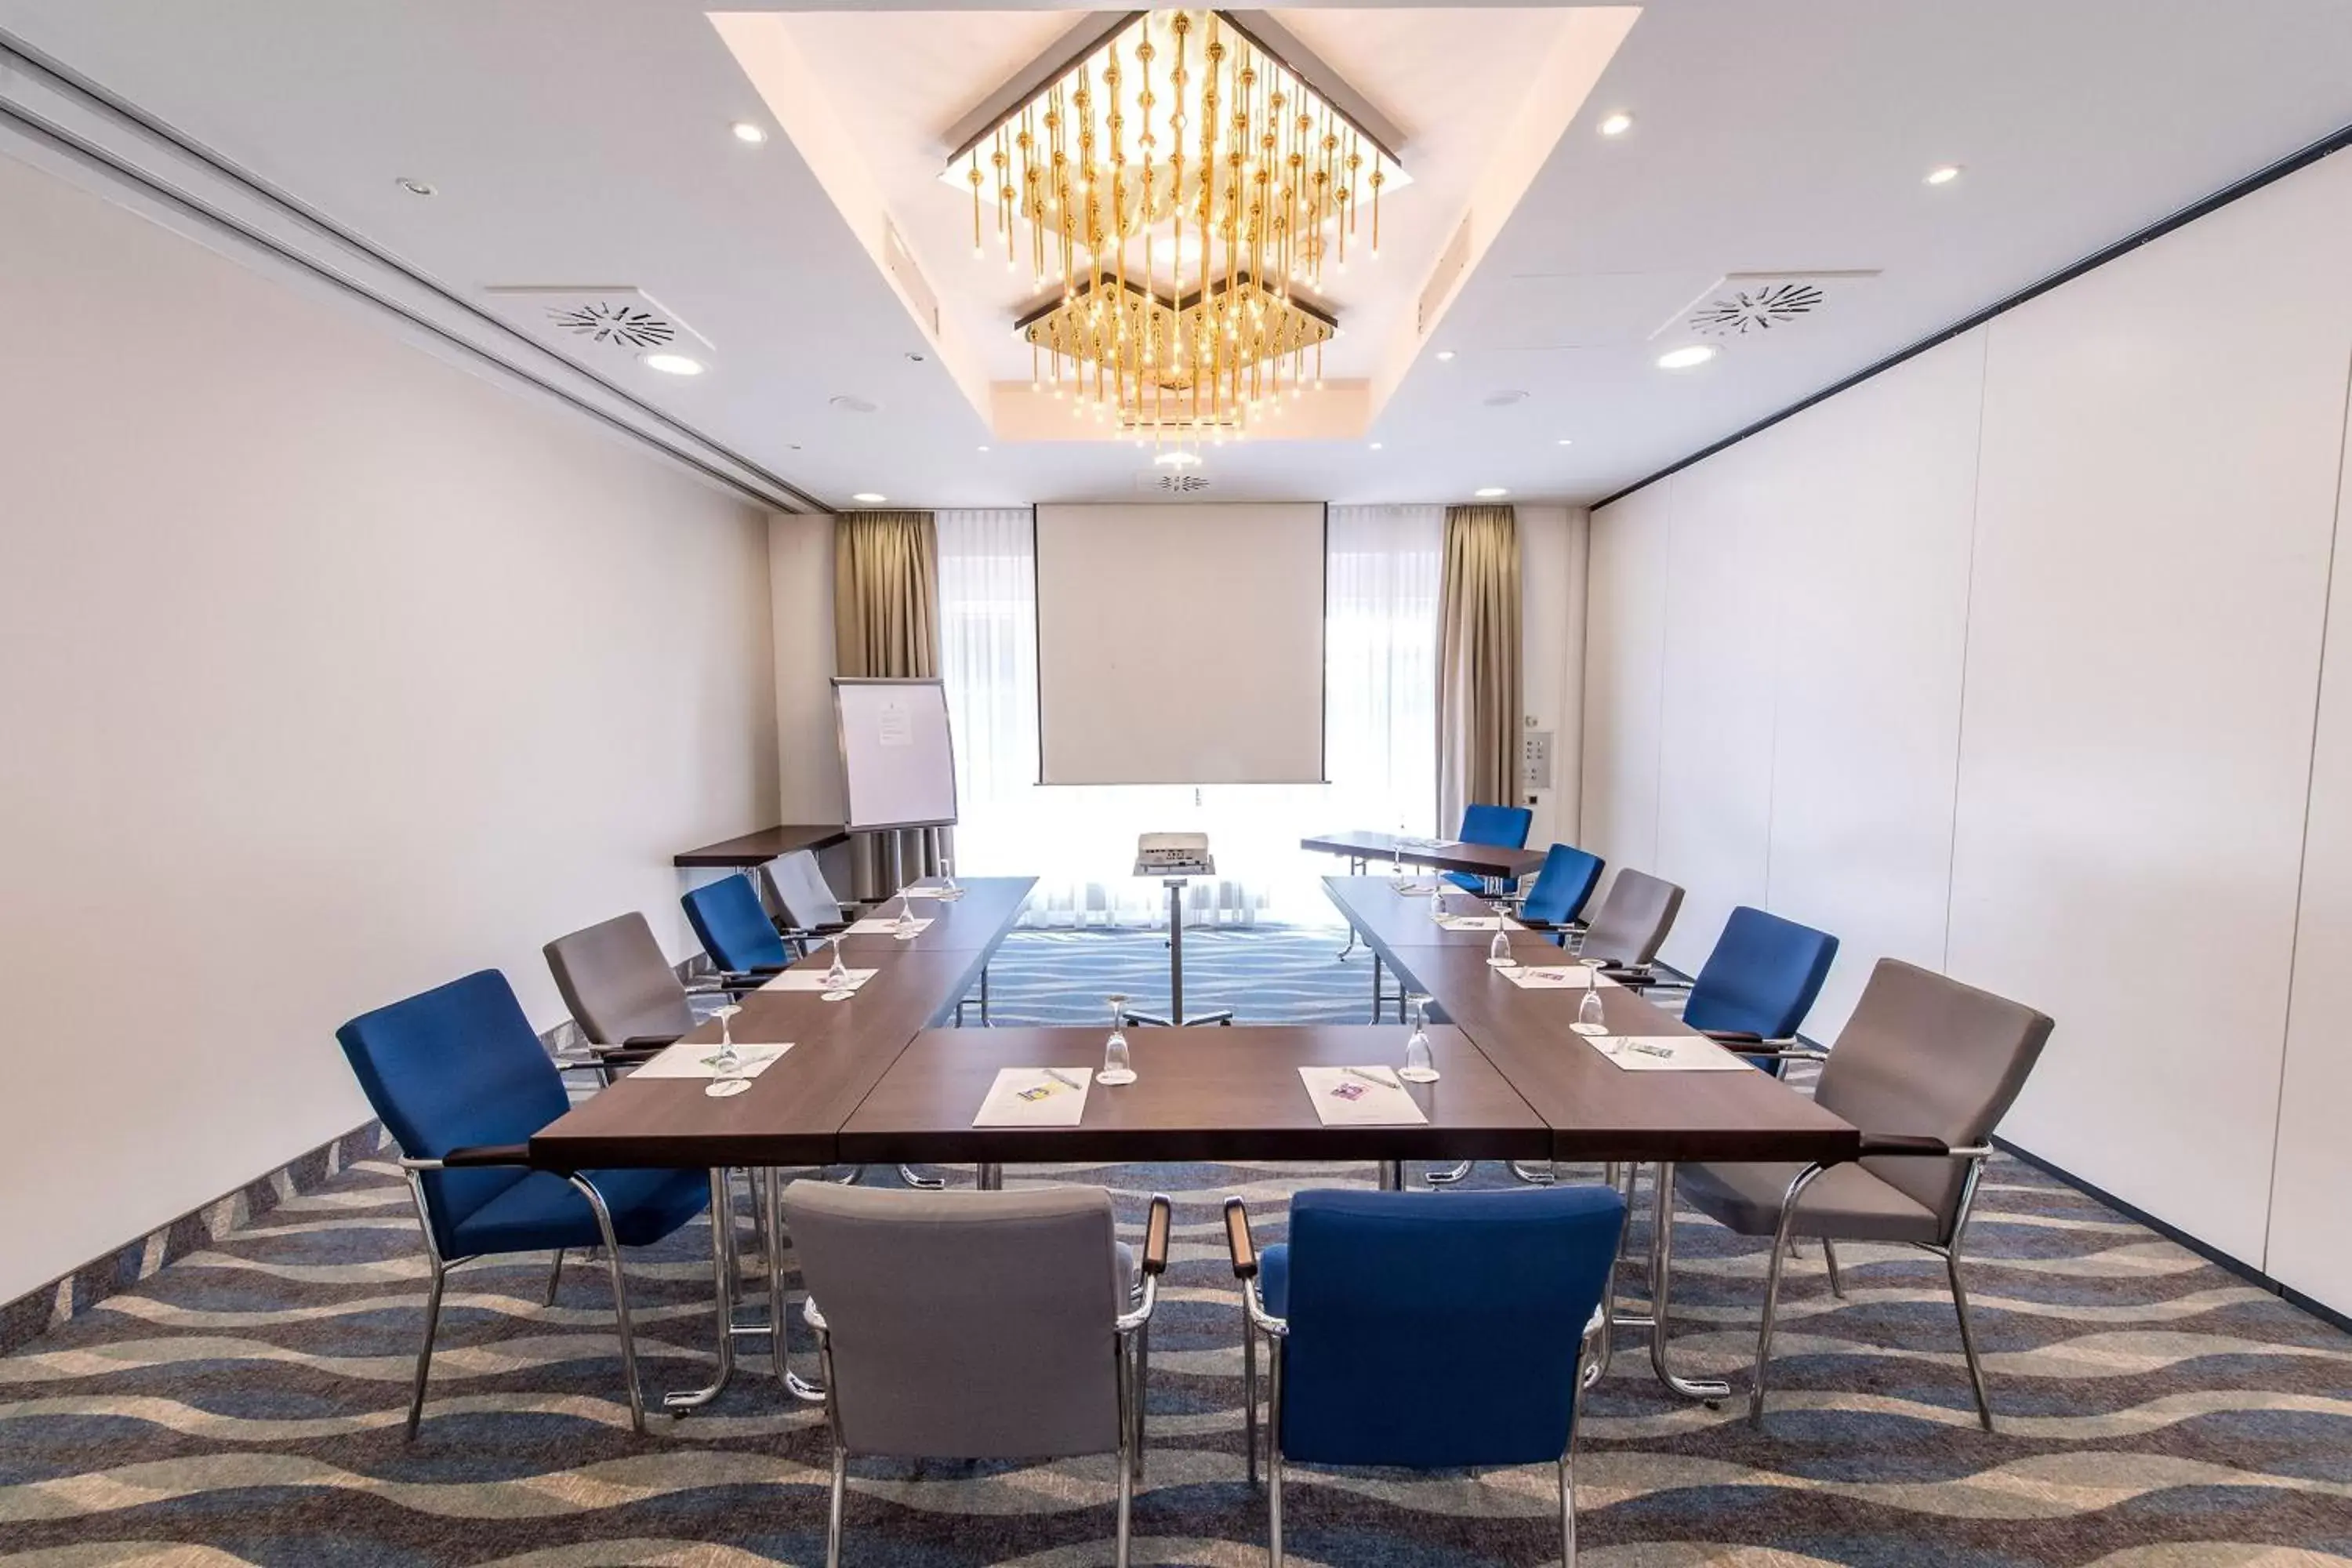 Meeting/conference room in Dorint Hotel Alzey/Worms